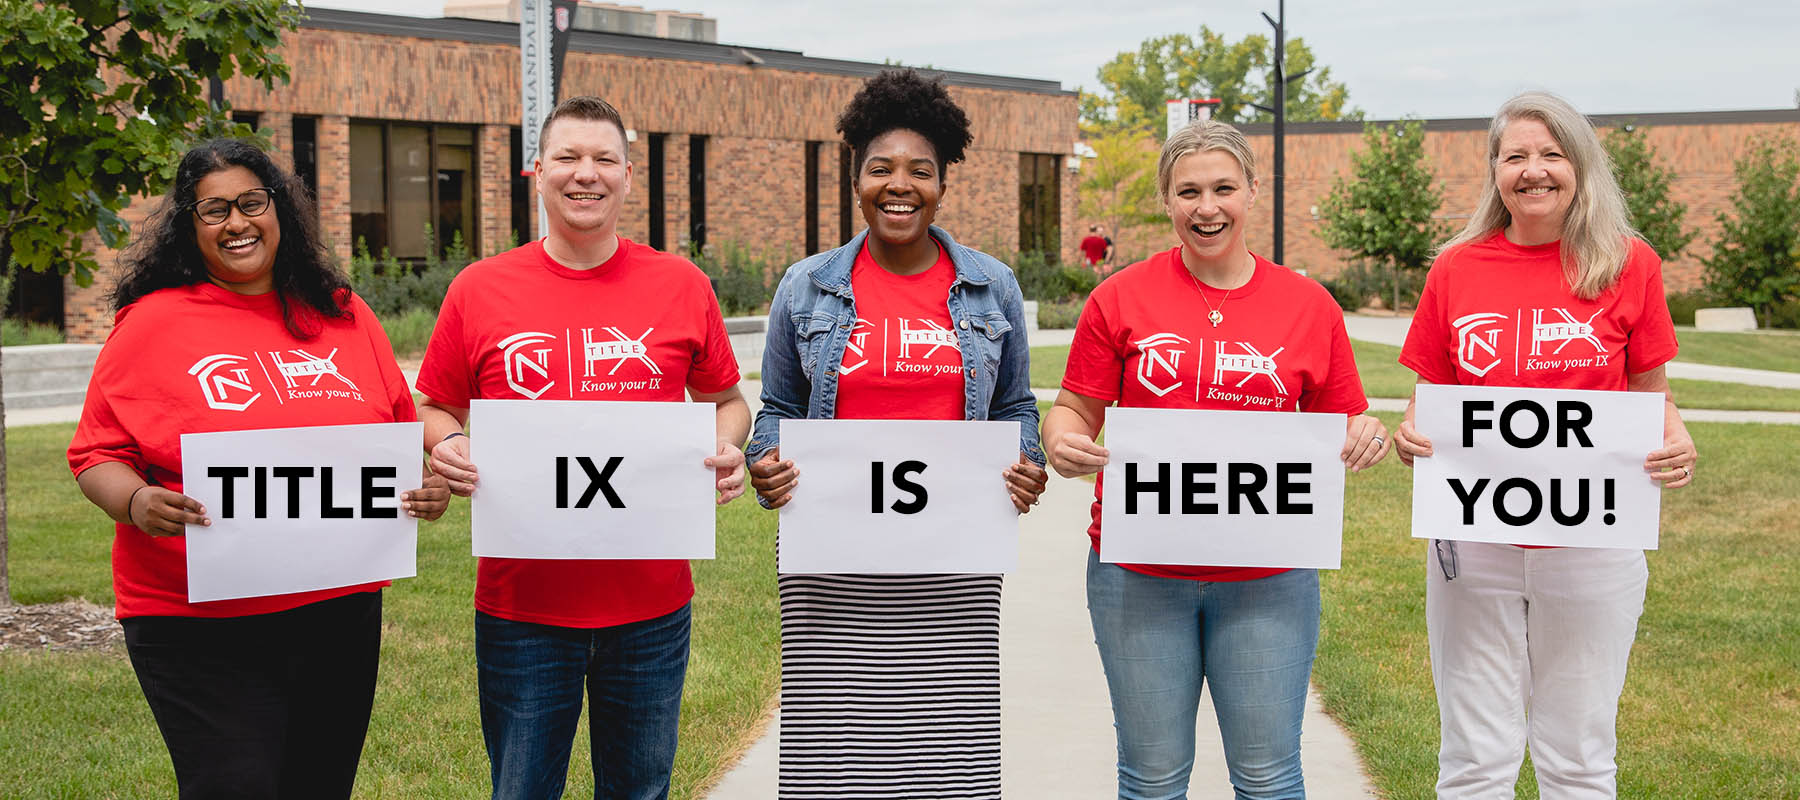 Normandale Title IX staff hold signs that say "Title IX is here for you!"